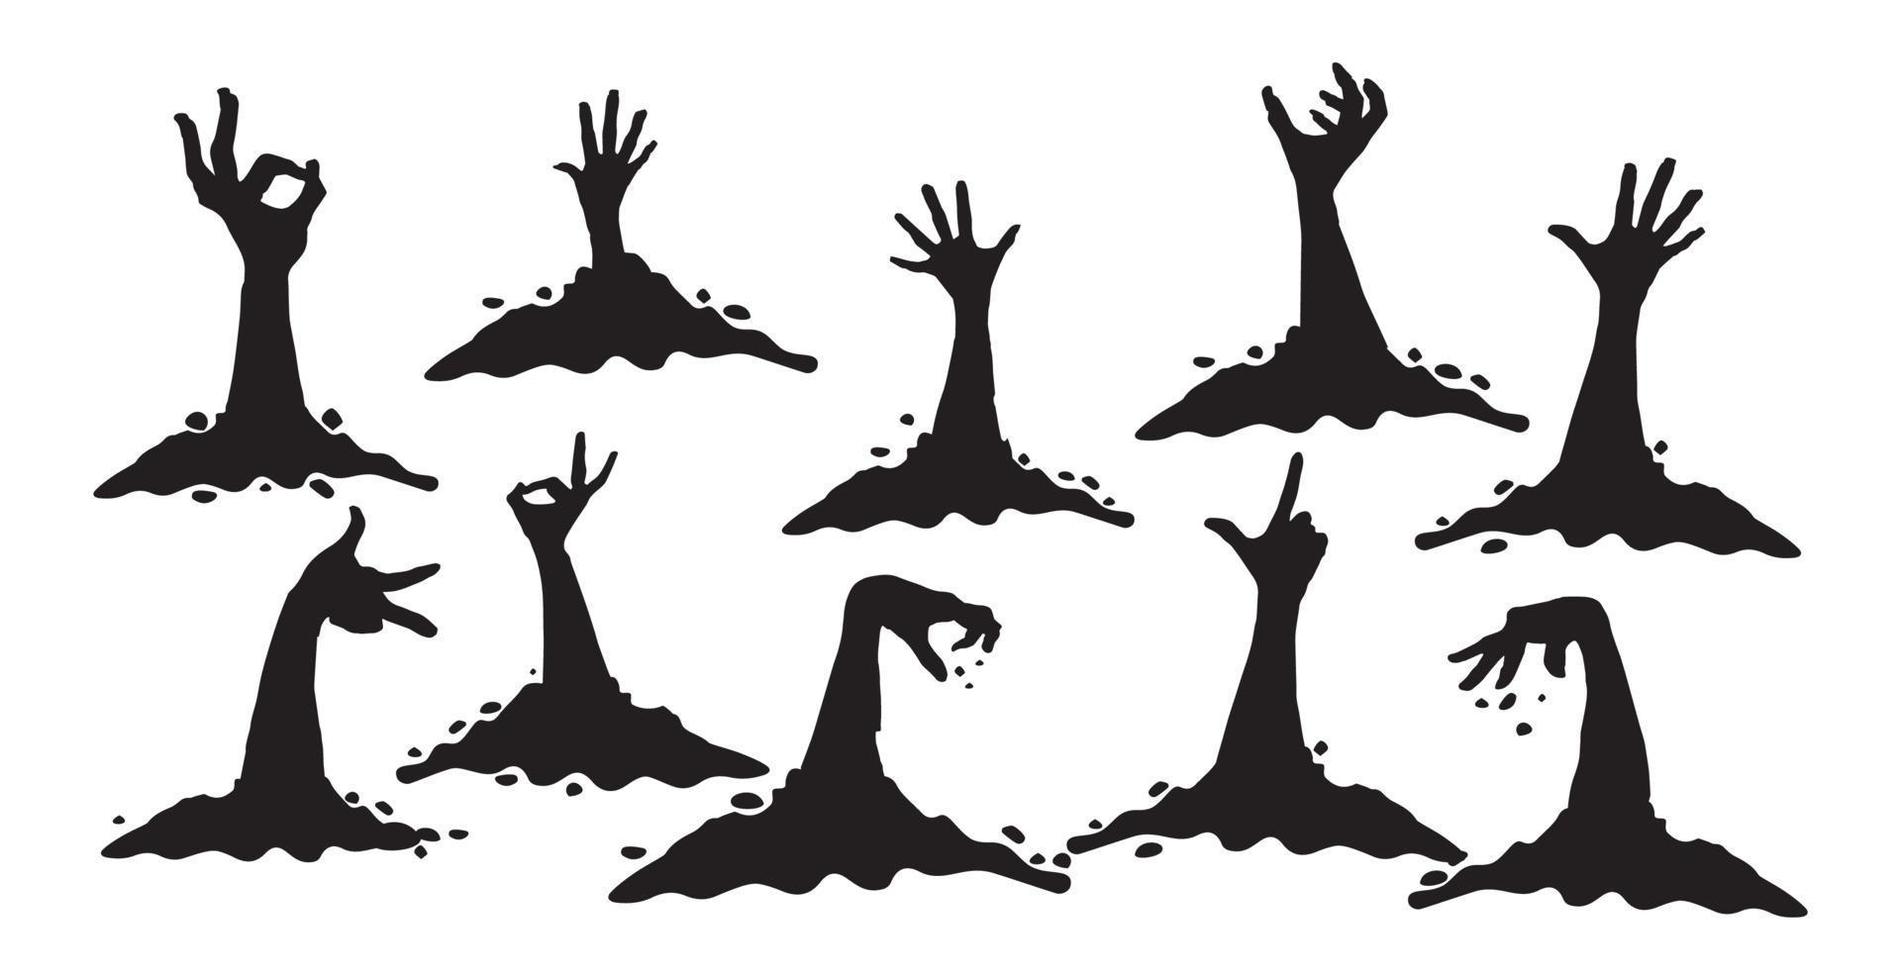 Hands crawling out of the ground halloween on a white background - Vector